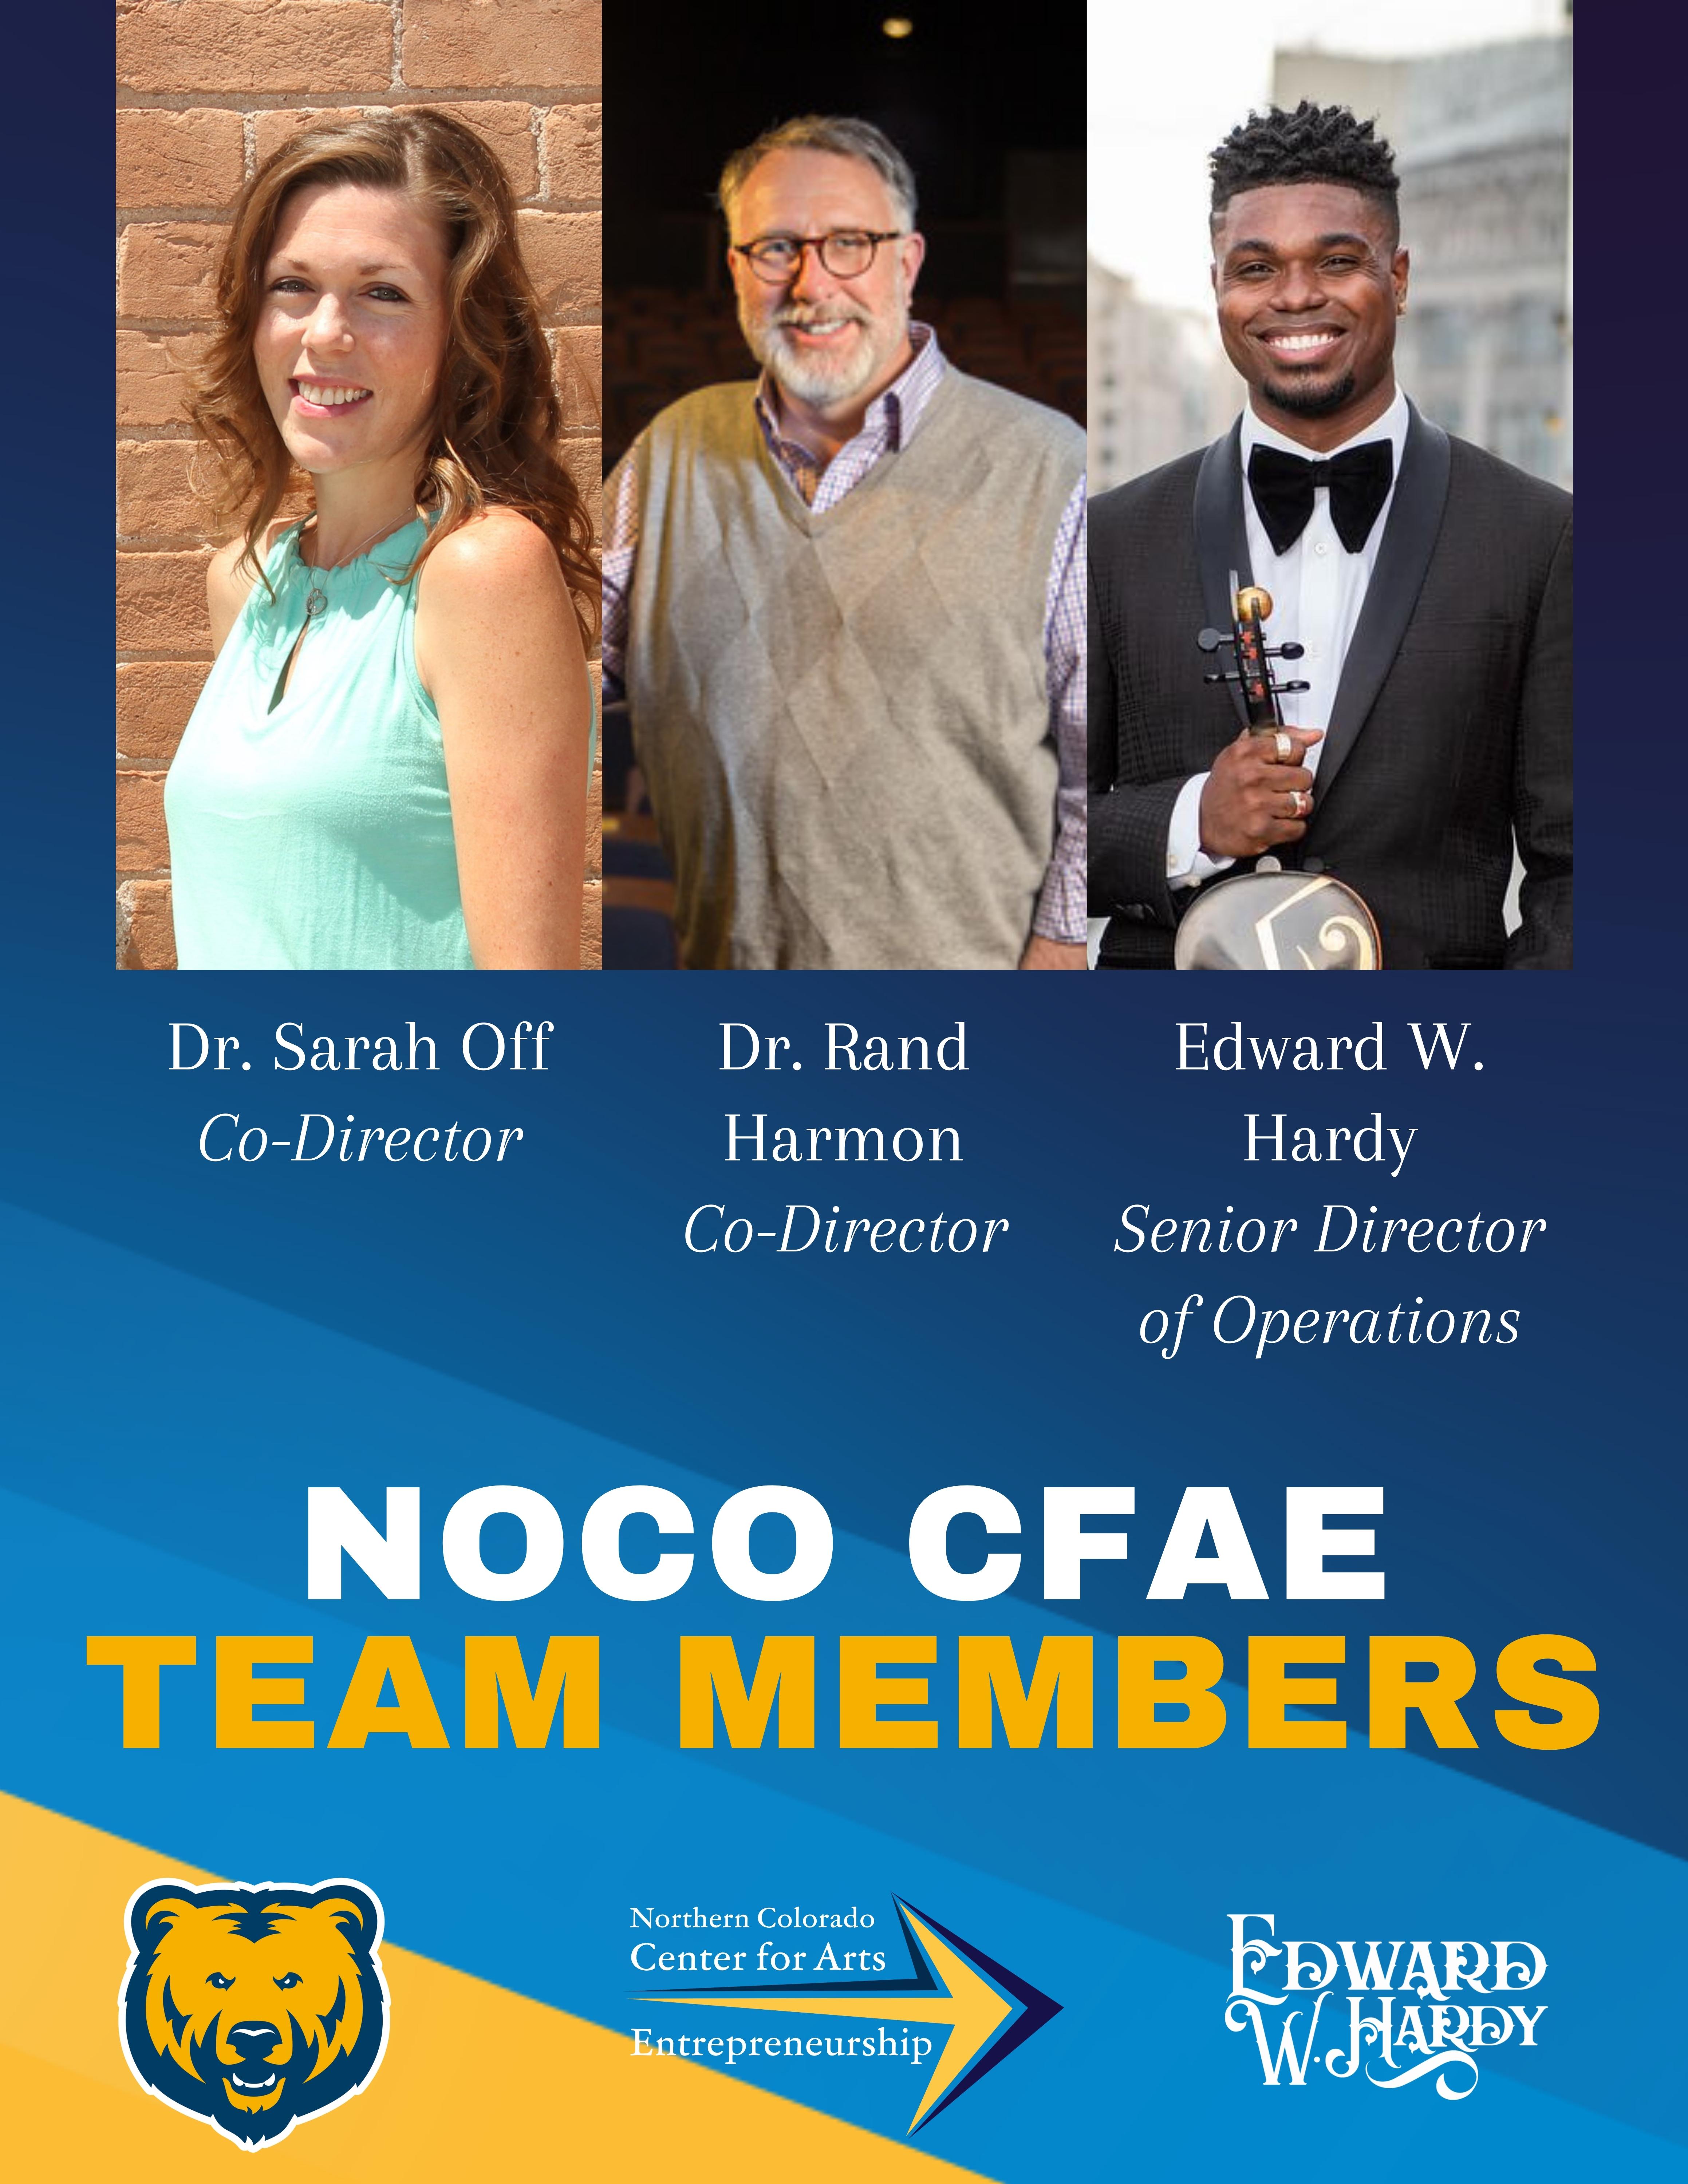 Founders of the Northern Colorado Center for Arts Entrepreneurship | Co-directors Dr. Sarah Off, Dr. Rand Harmon and senior director of operations Edward W. Hardy